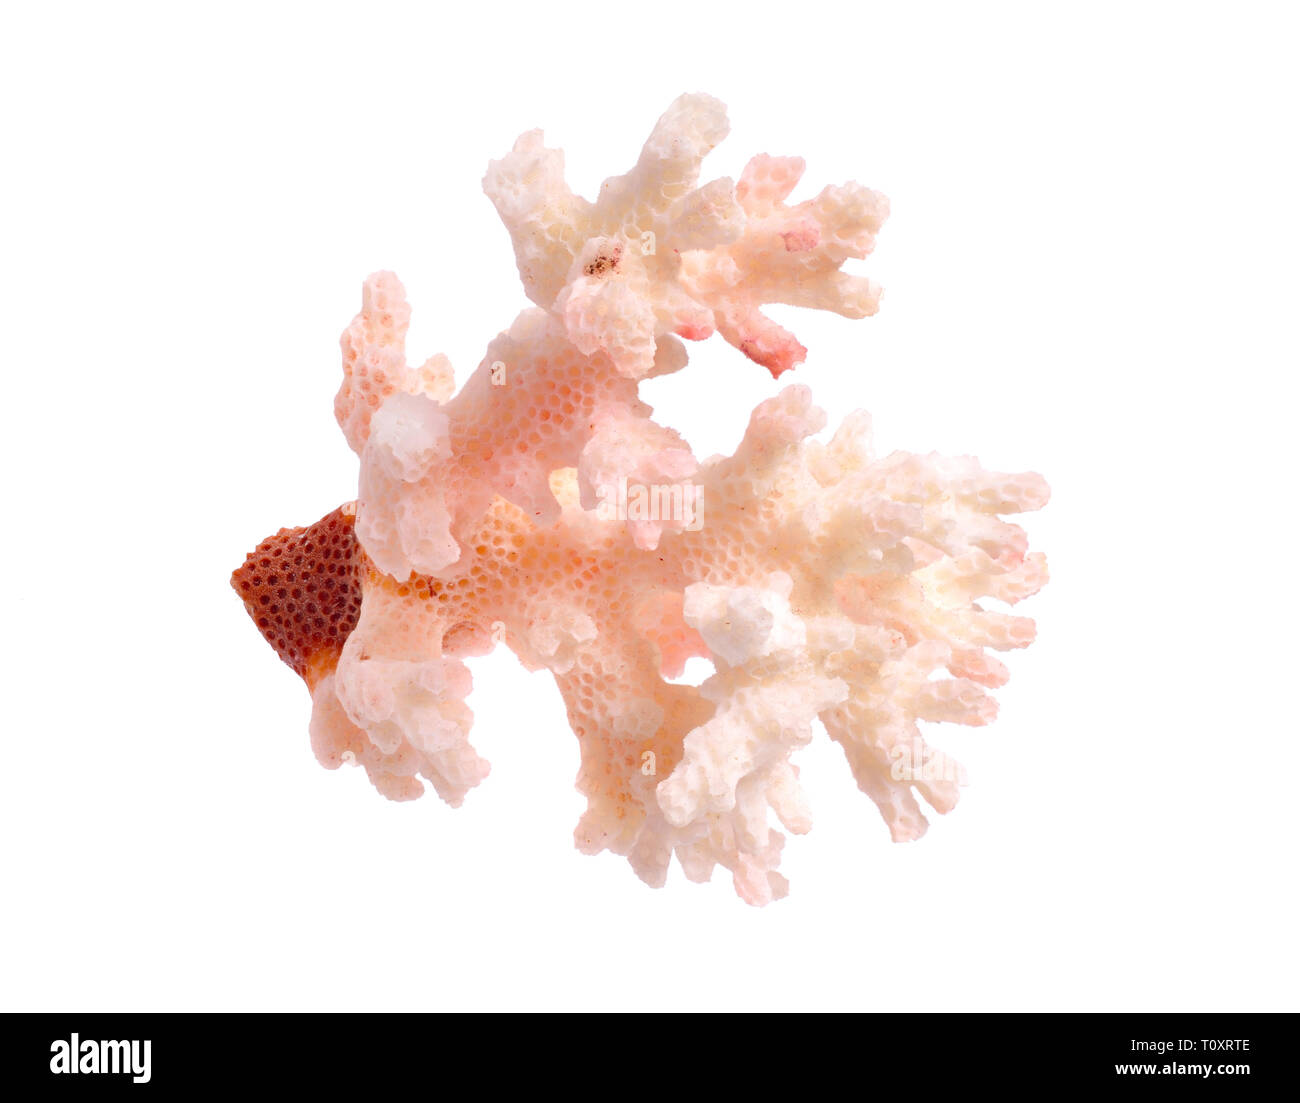 Piece of pink Coral isolated on white background. Full dept of field. Stock Photo